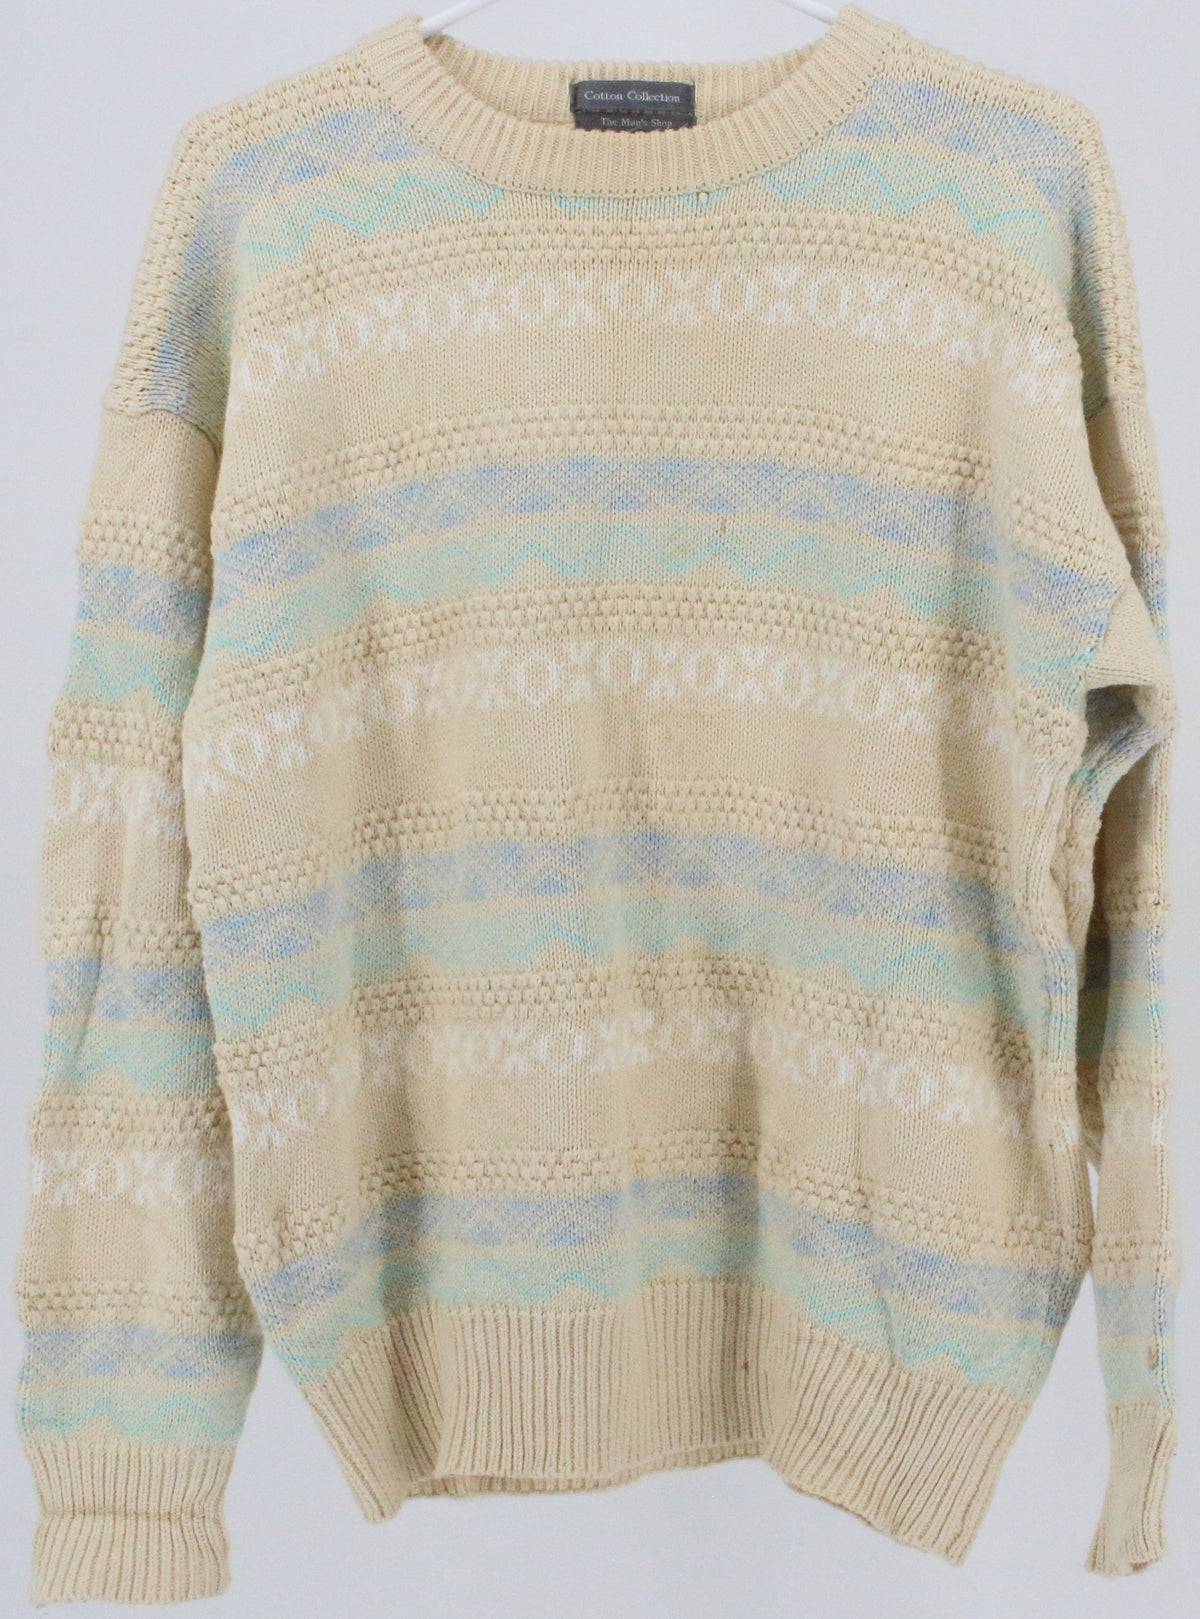 The Man's Shop Off White and Light Blue Sweater